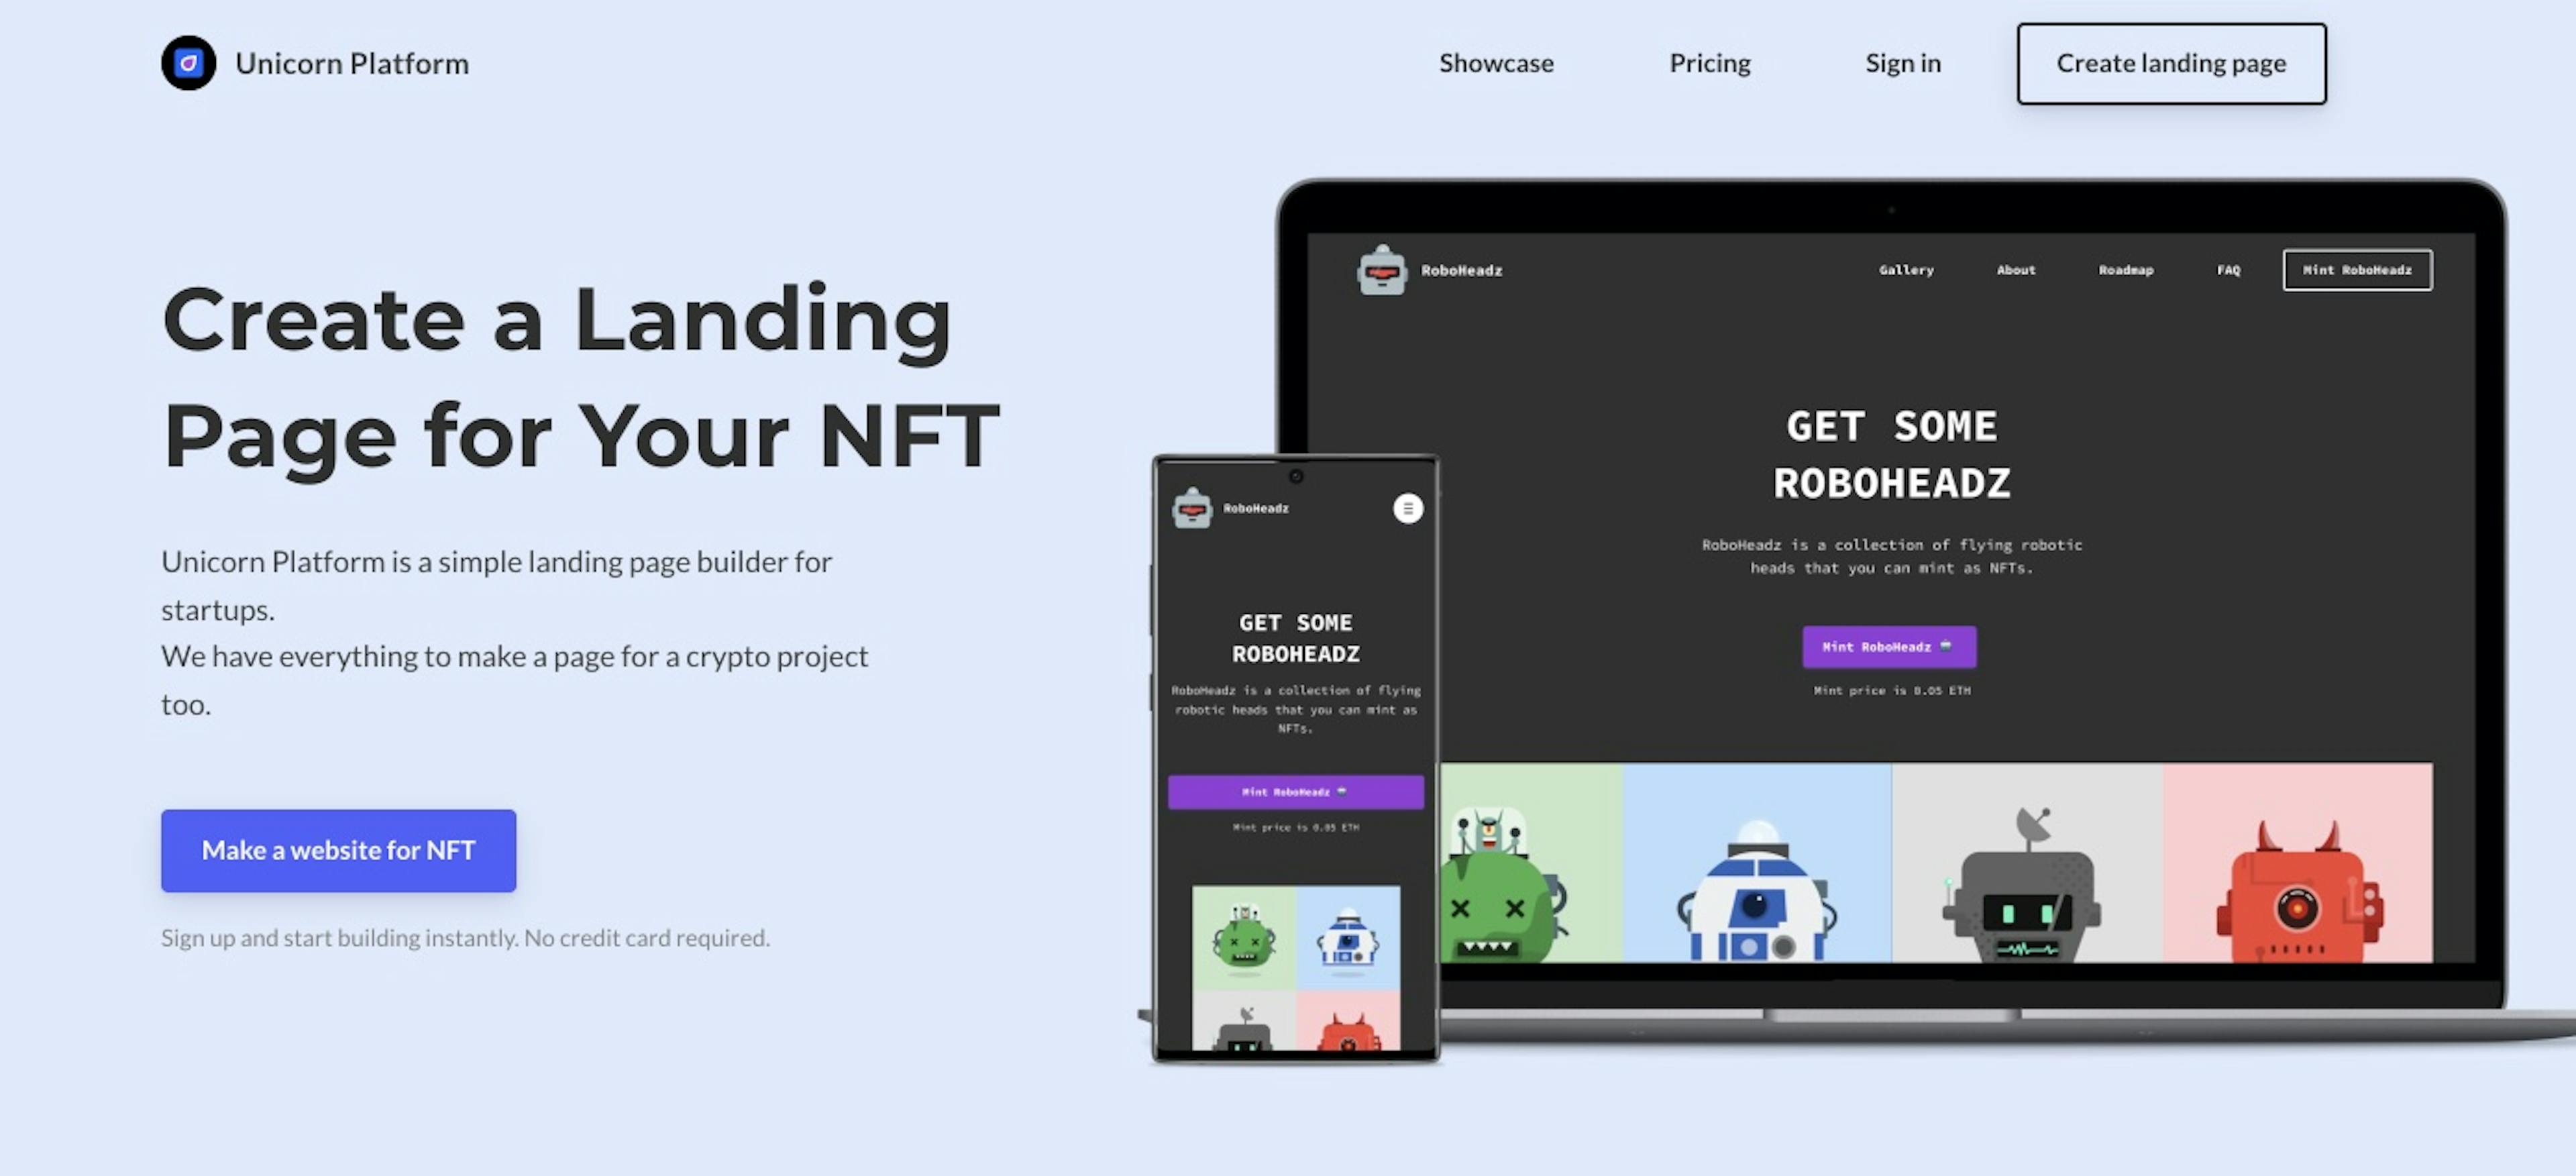 A special page for the "NFT" keyword.